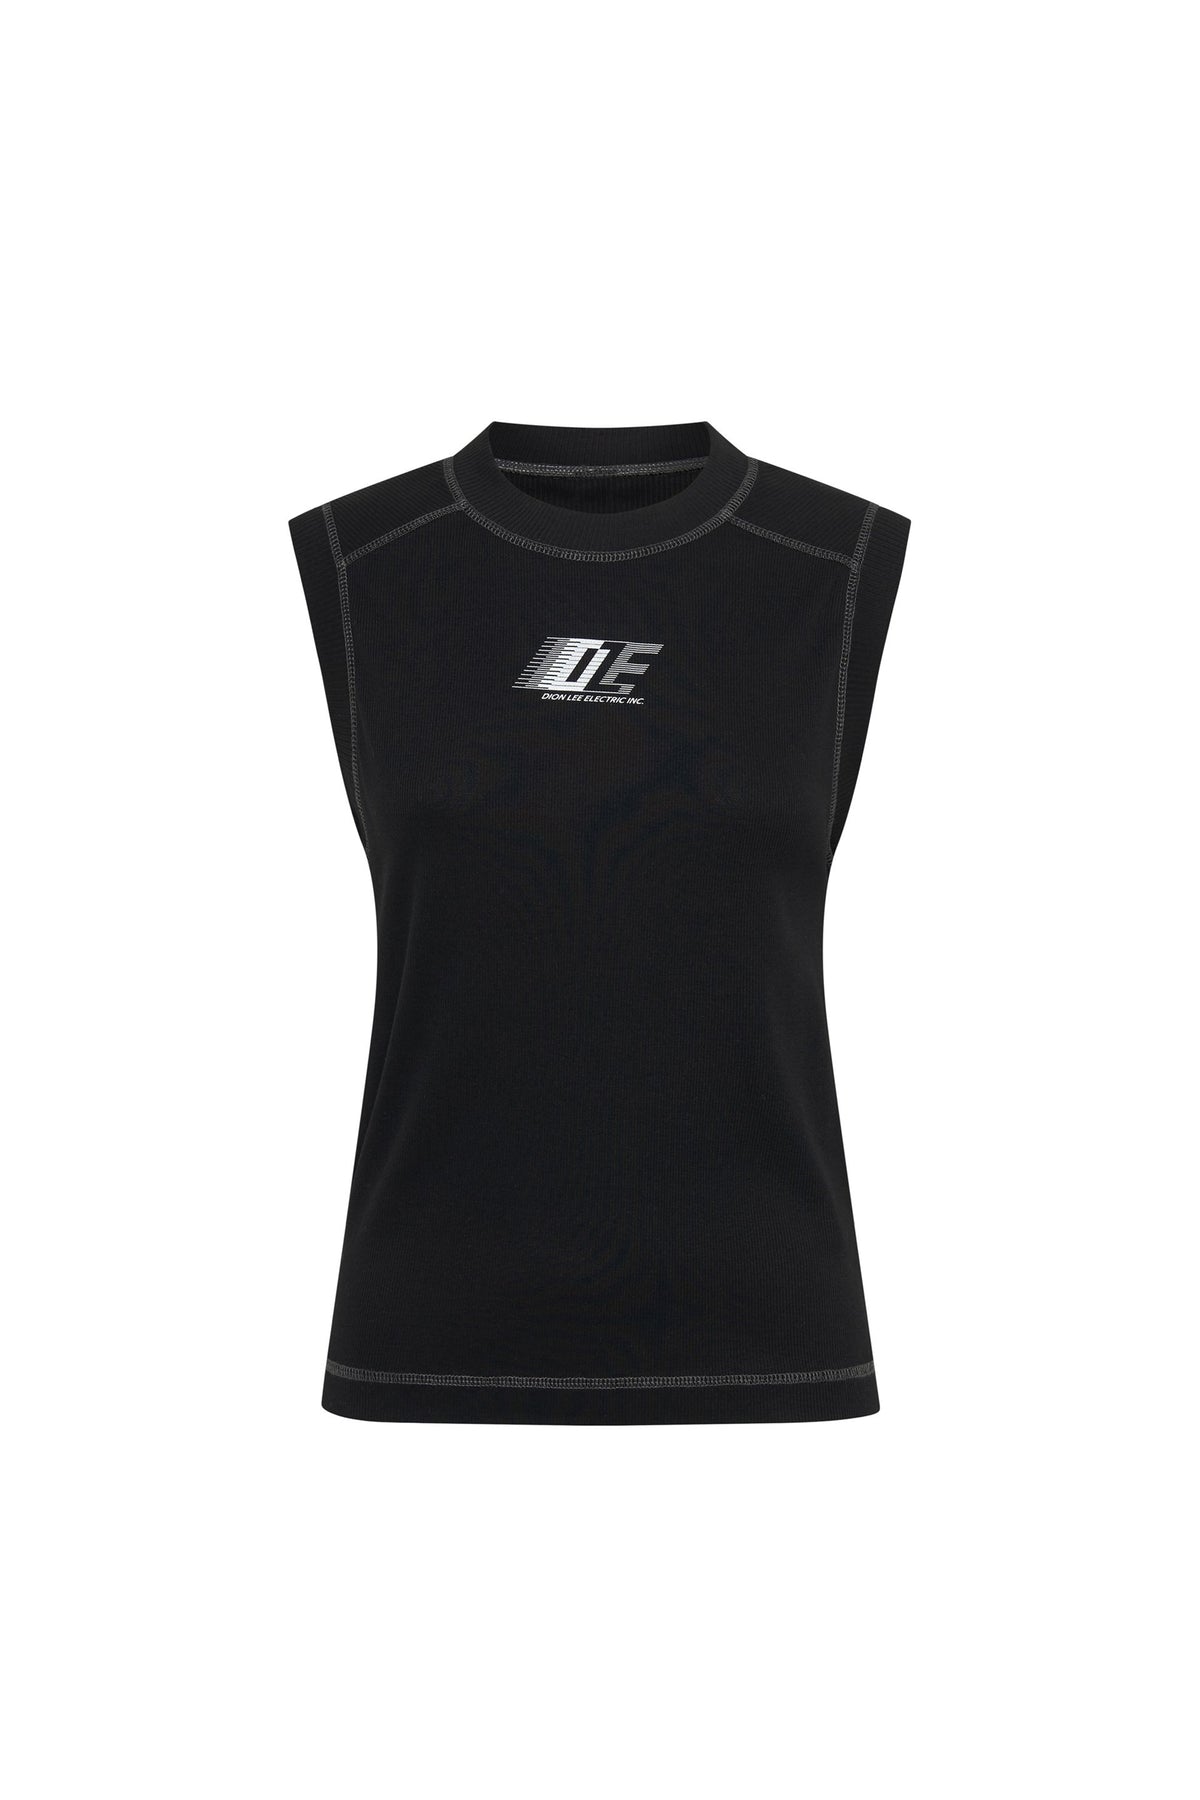 DLE MUSCLE TEE / BLK